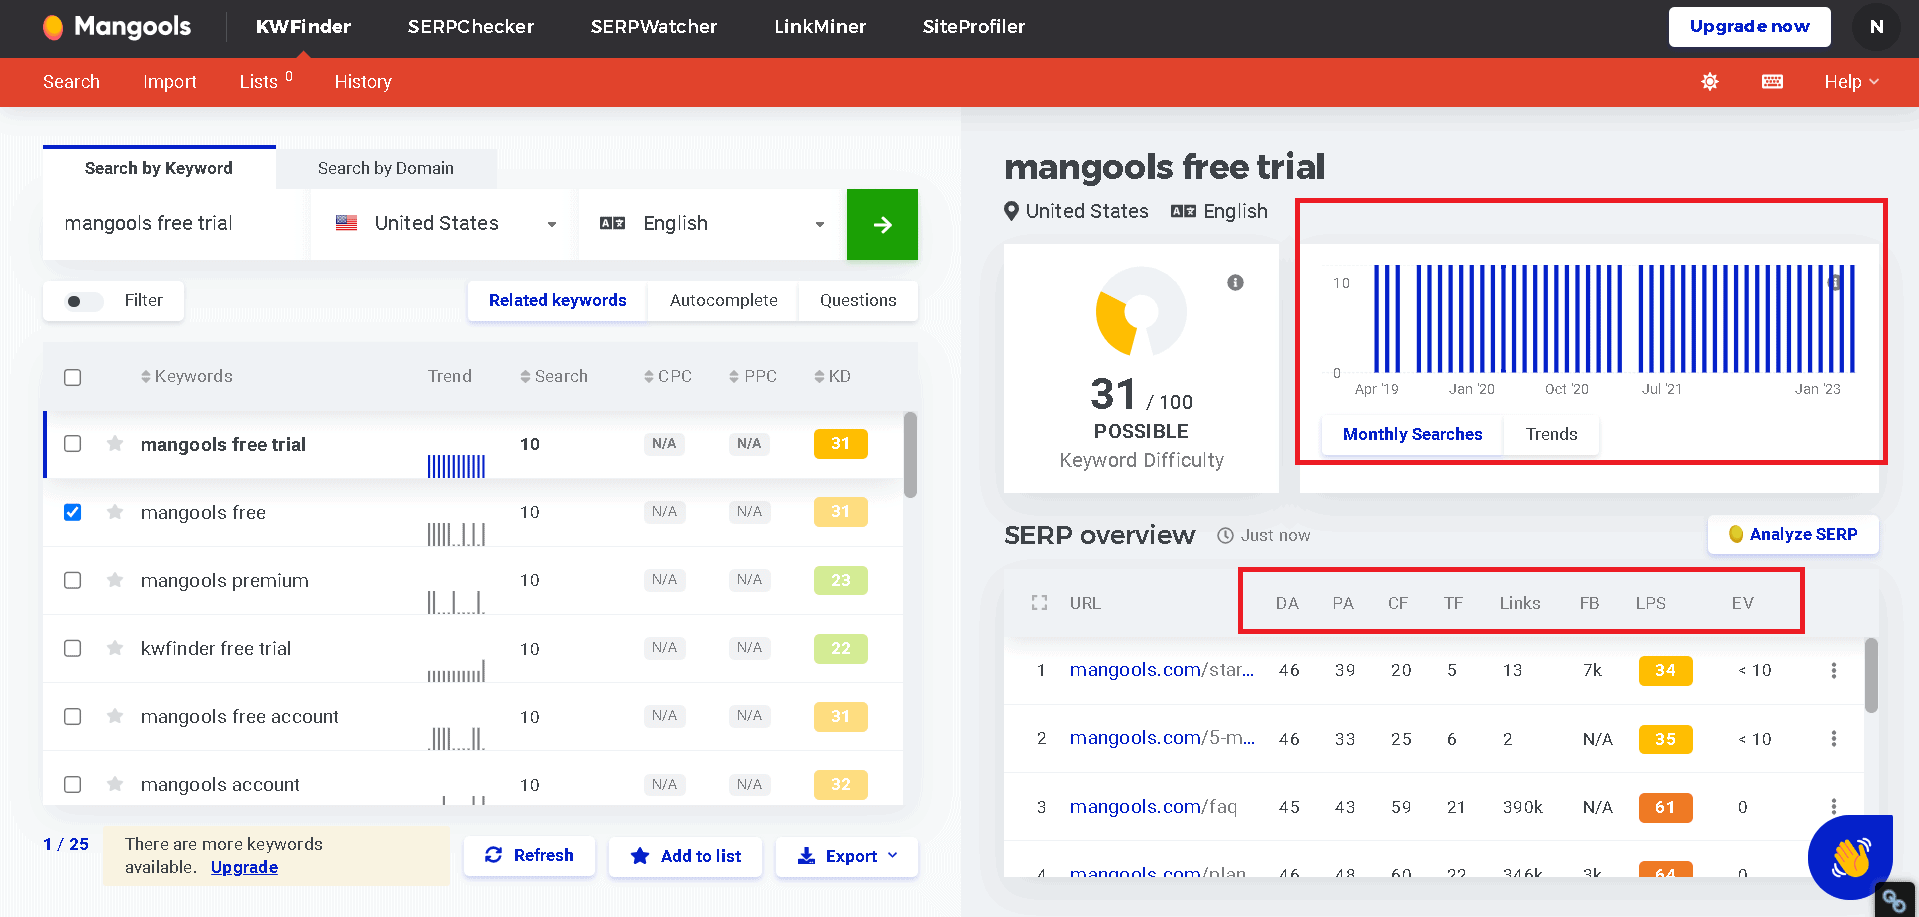 Mangools KWFinder also shows you a glance of your compeitition